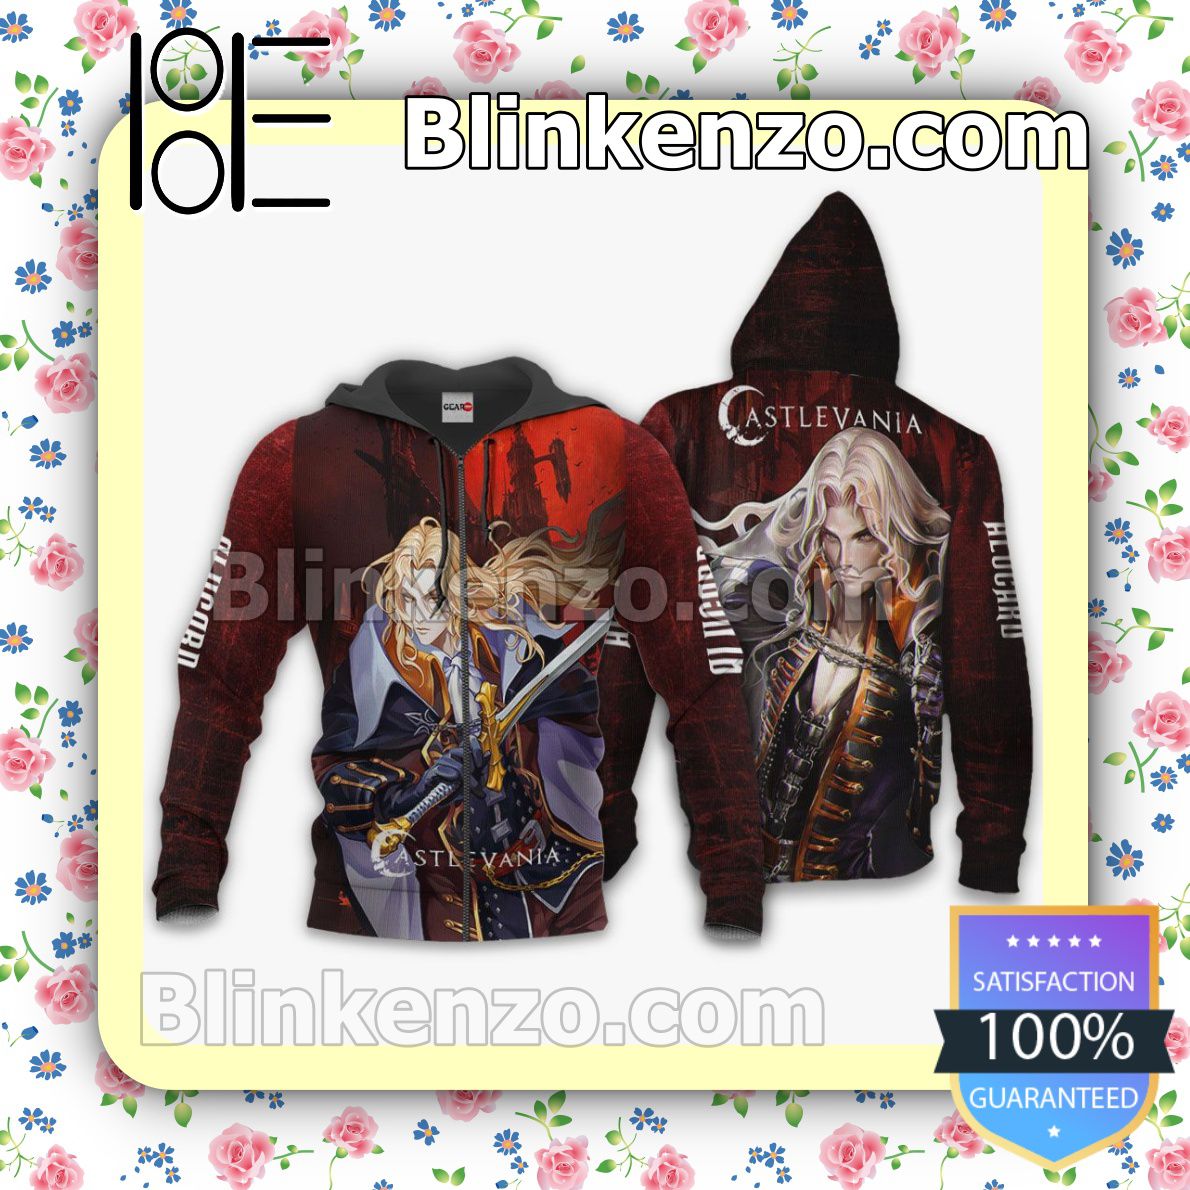 Castlevania Alucard Anime Merch Stores Personalized T-shirt, Hoodie, Long Sleeve, Bomber Jacket